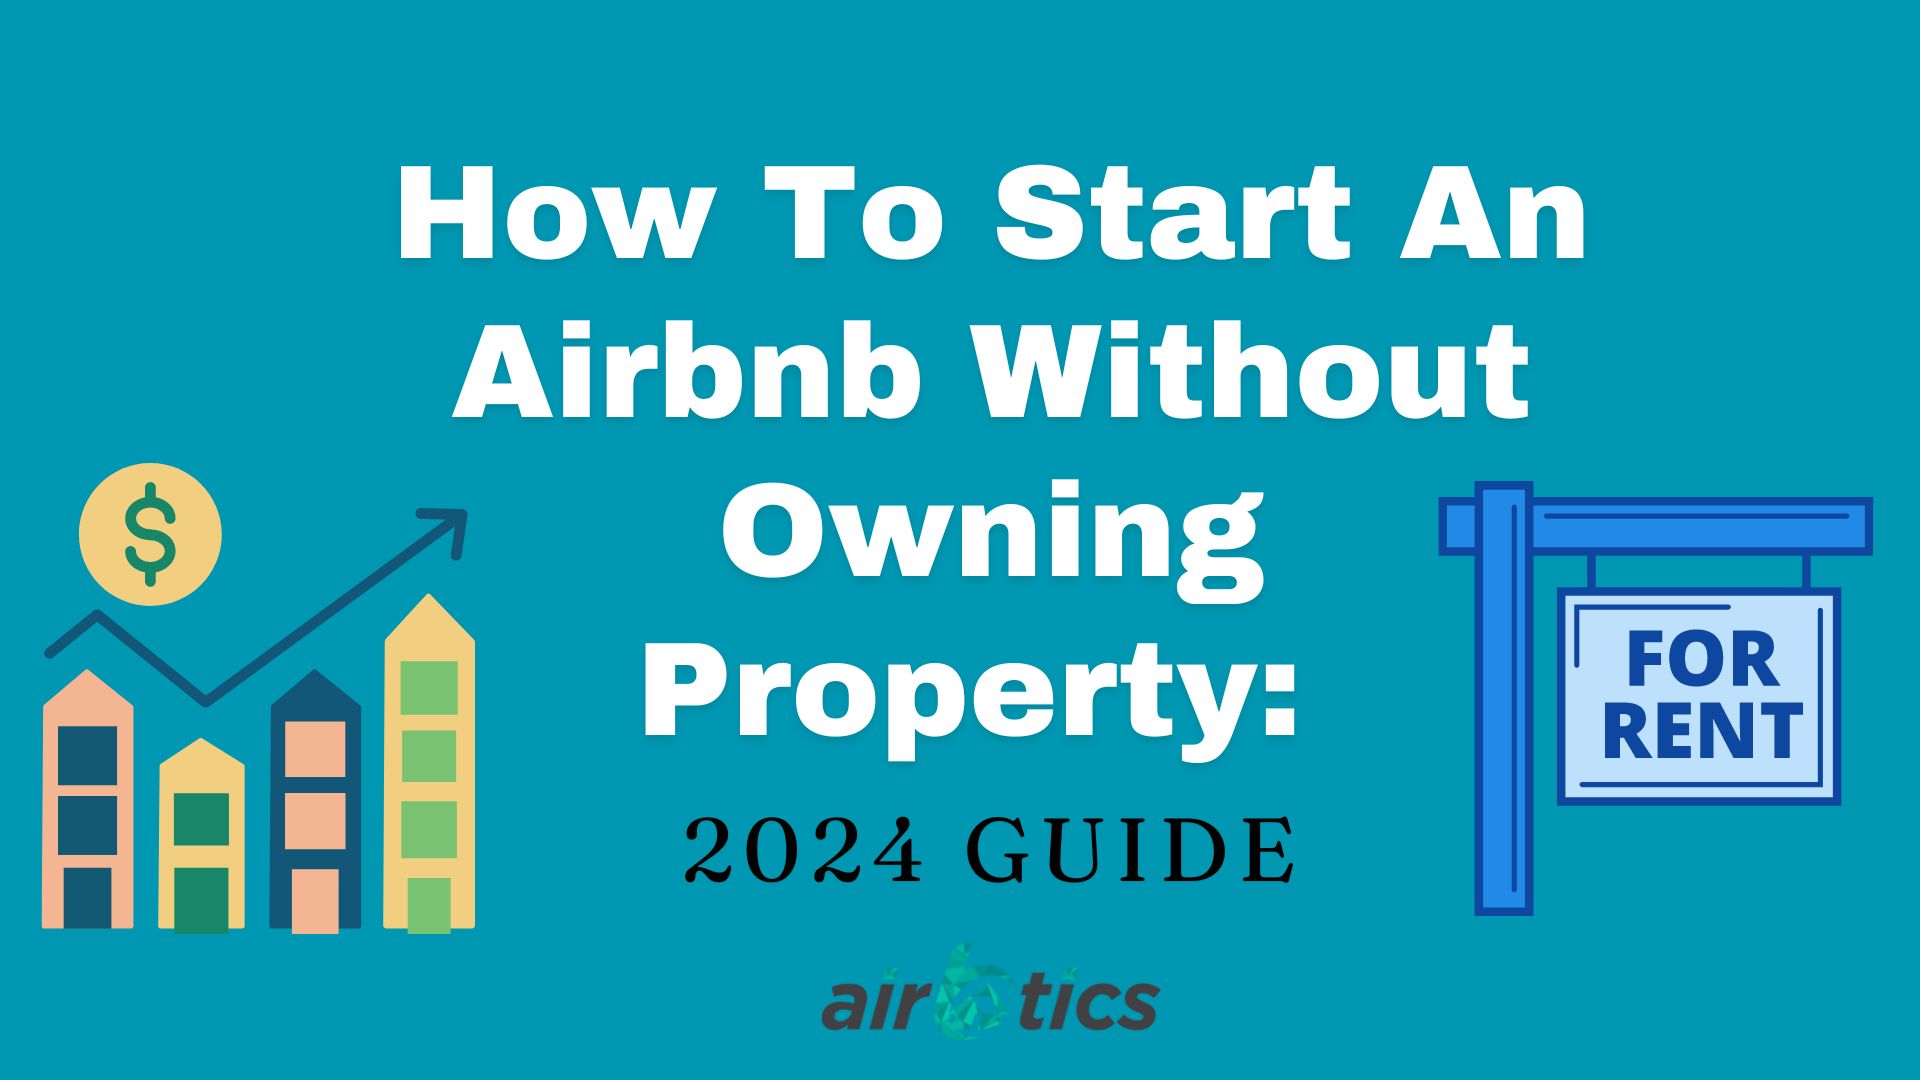 how-to-start-an-airbnb-without-owning-property 1